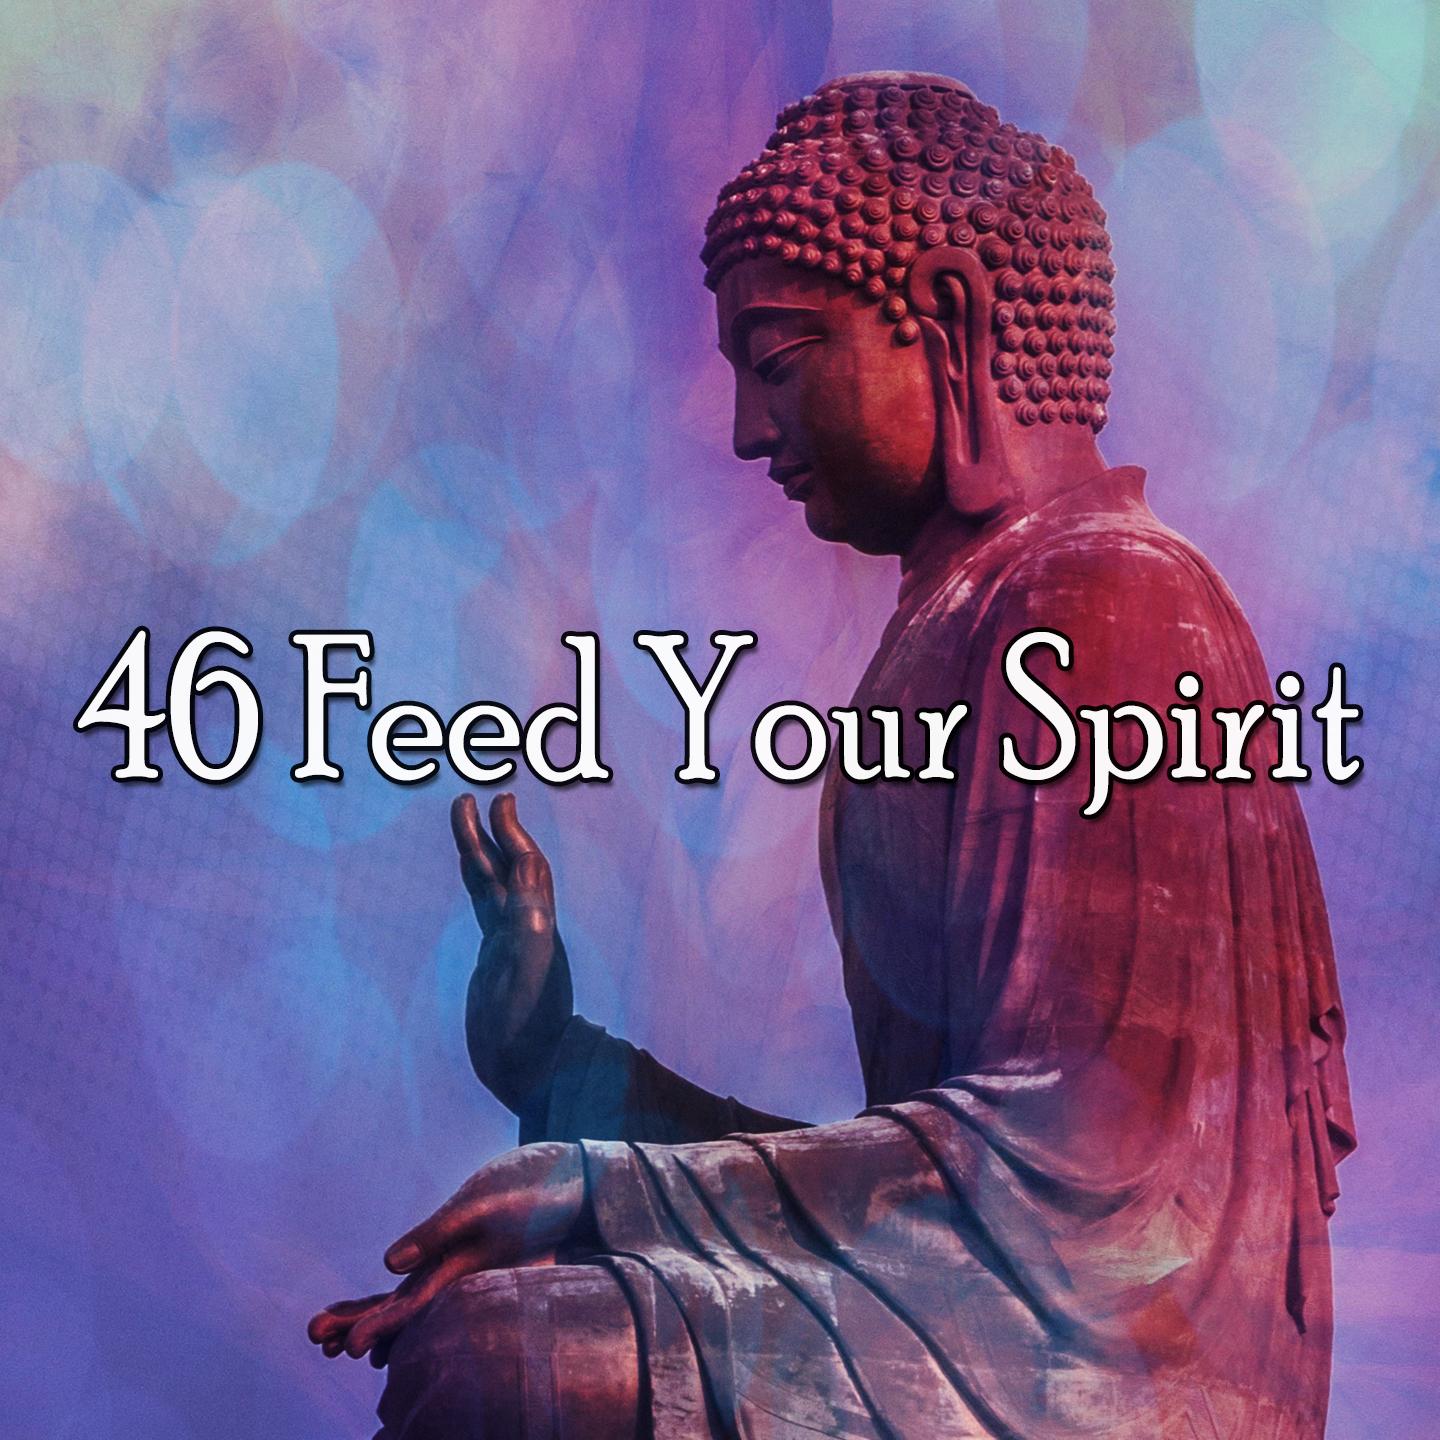 46 Feed Your Spirit